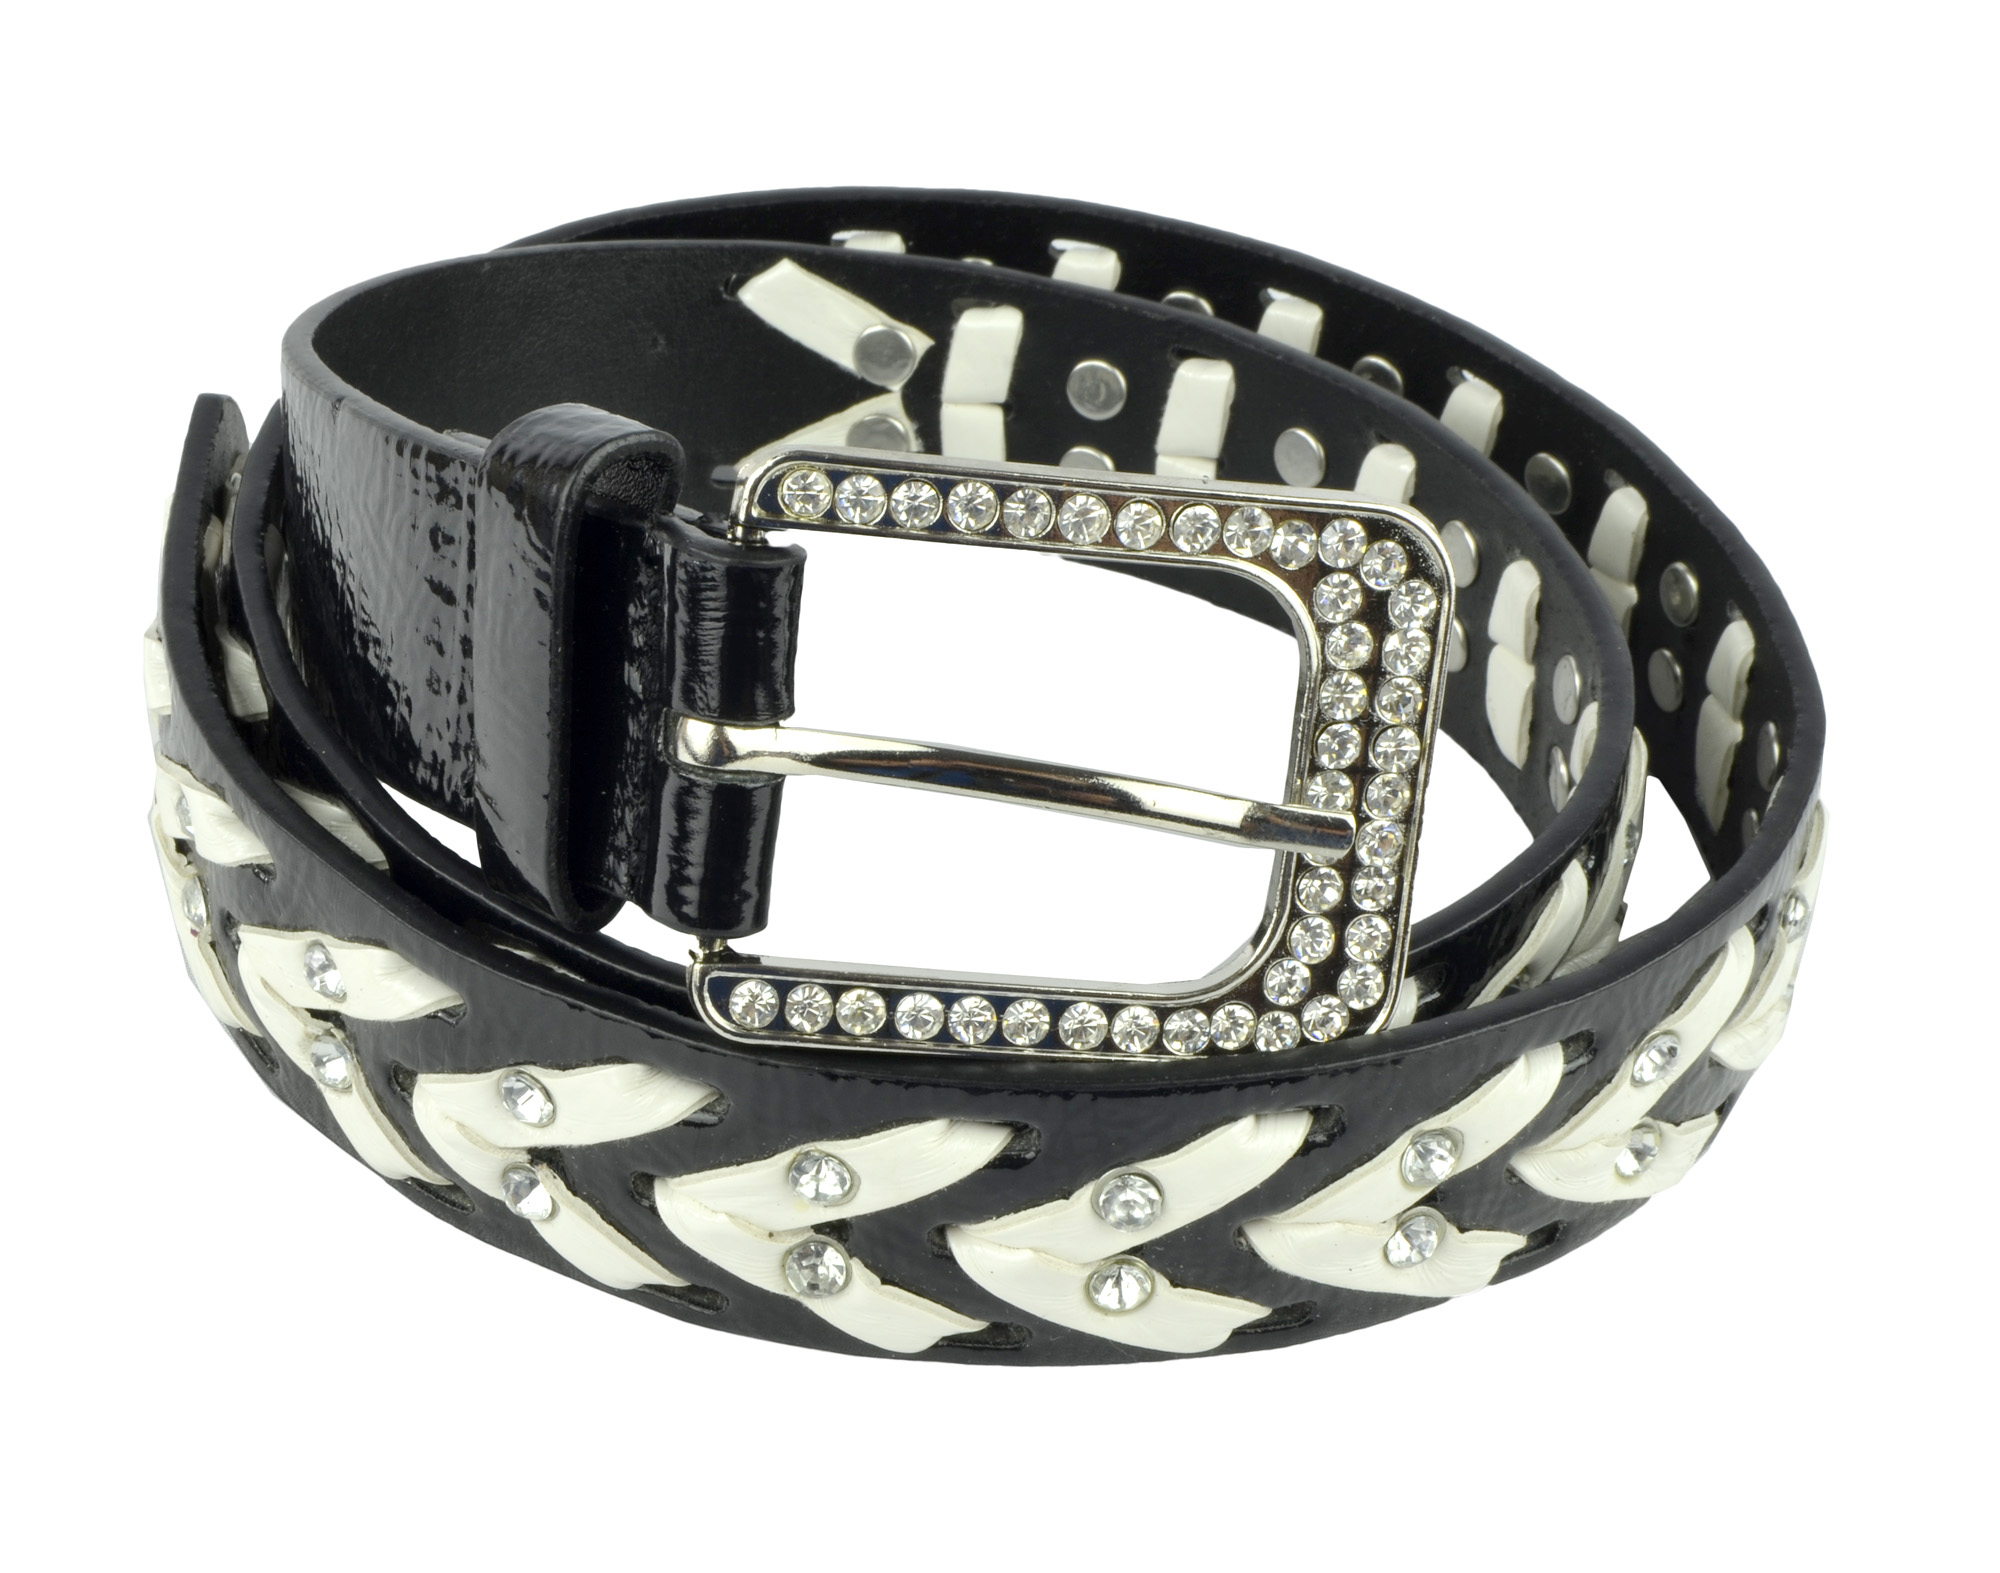 Womens Studded Belts - Multiple Colors & Designs - Western Cowgirl PU Leather Rhinestone Belt with Bling Buckles by Belle Donne - Black-VI